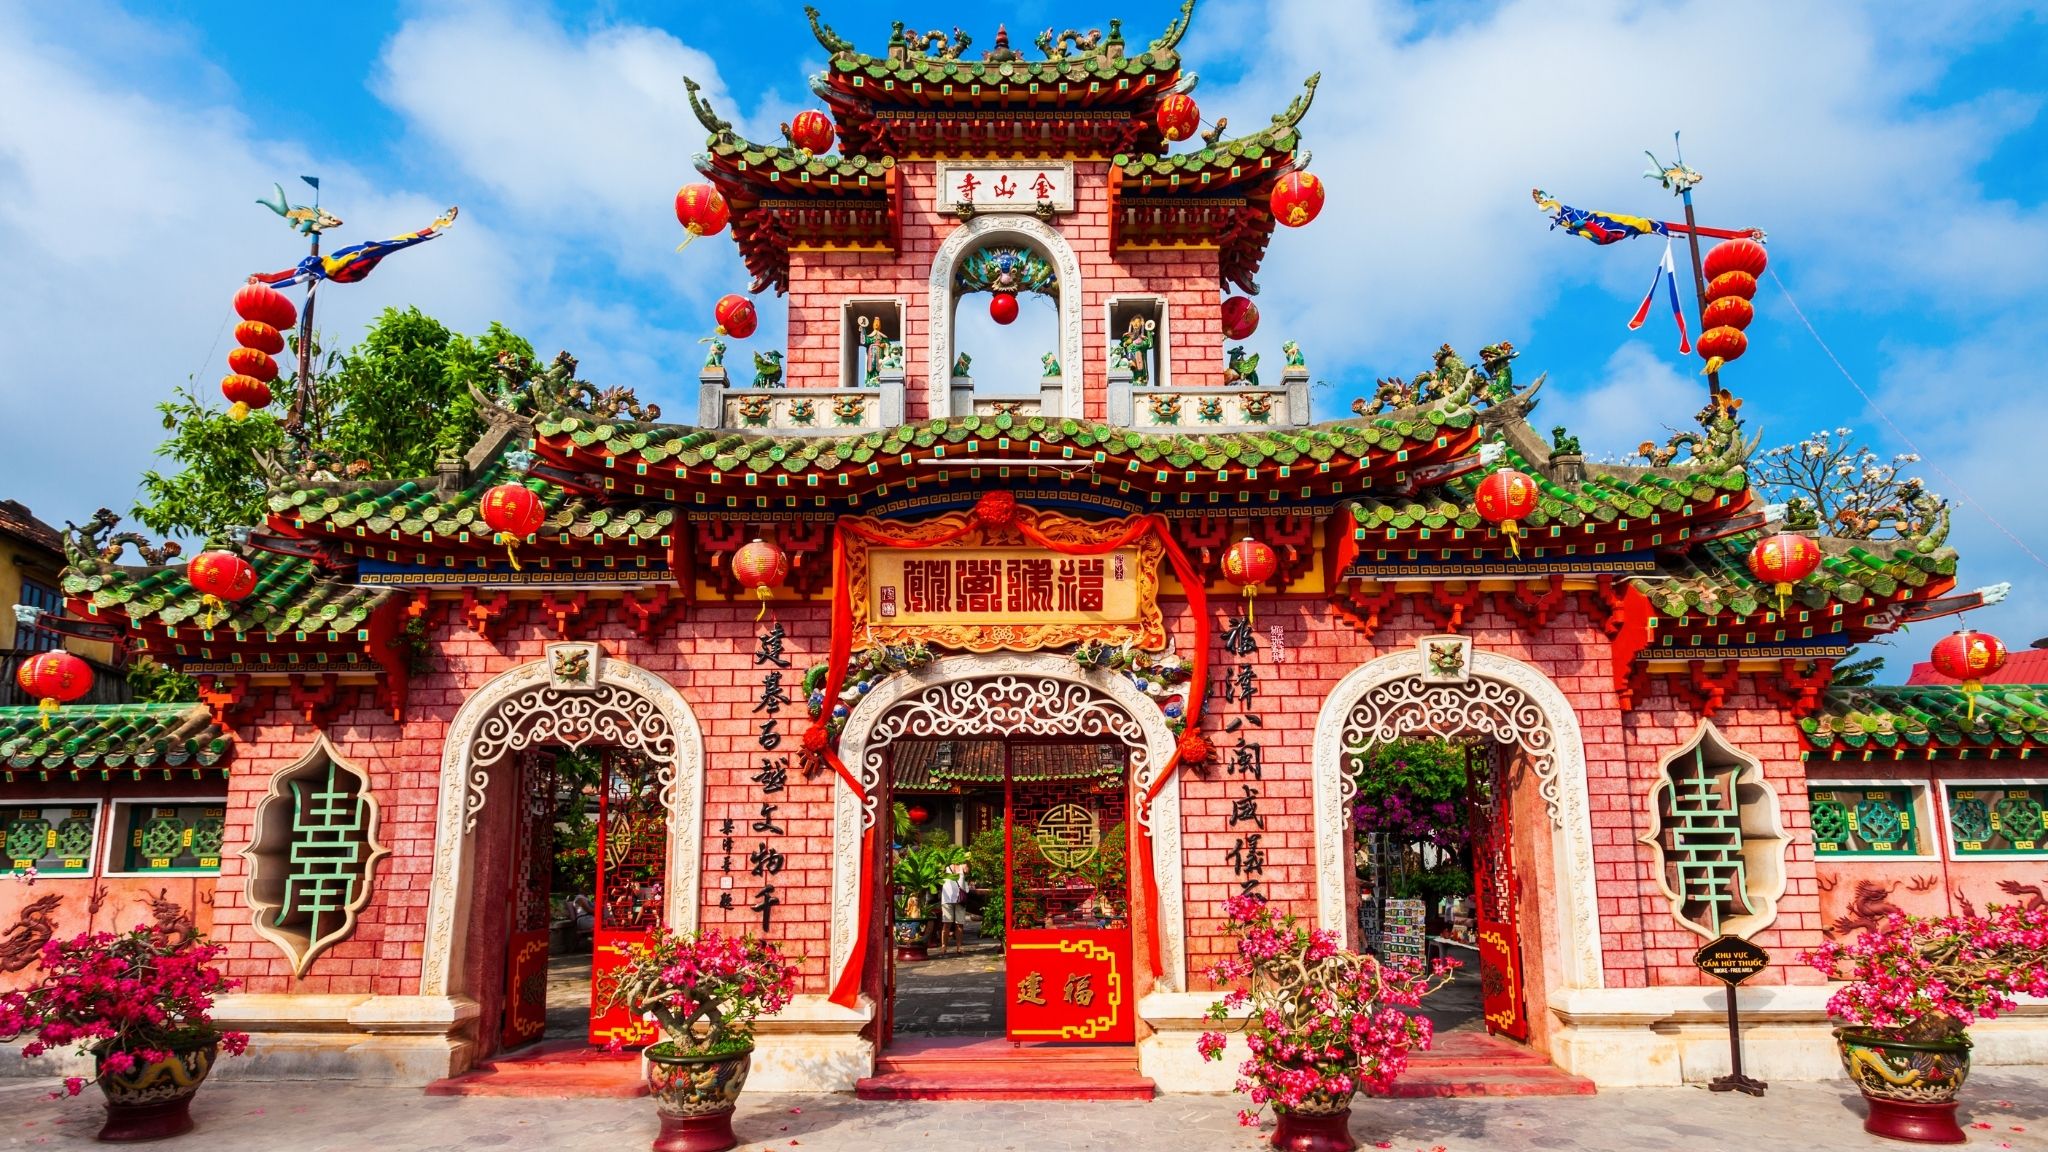 Admire The Stunning Architecture Of Fujian Assembly Hall